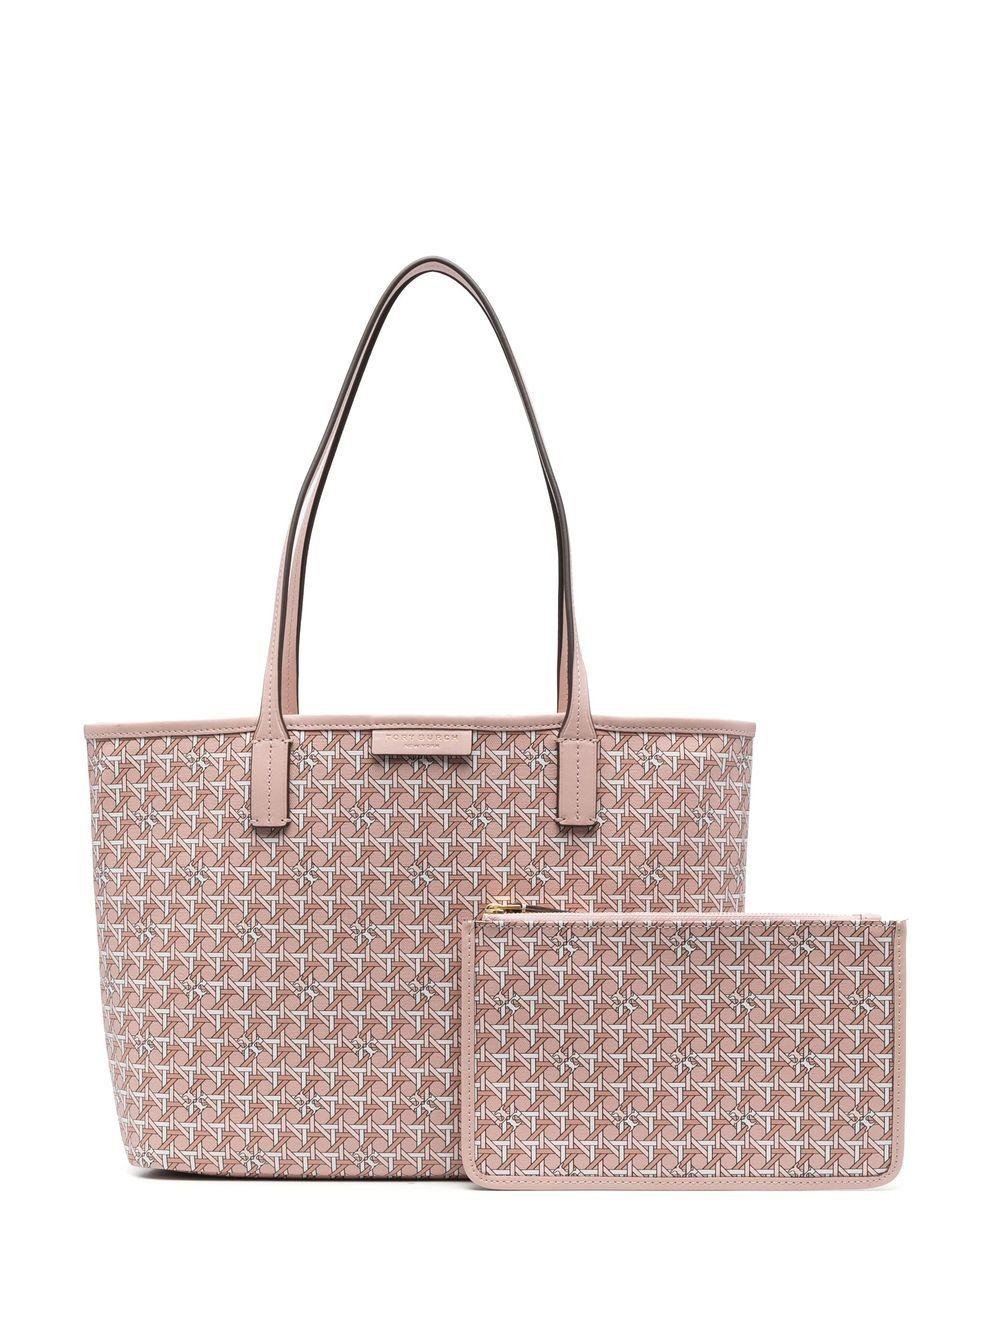 Tory Burch Ever-ready Monogram Tote Bag in Pink